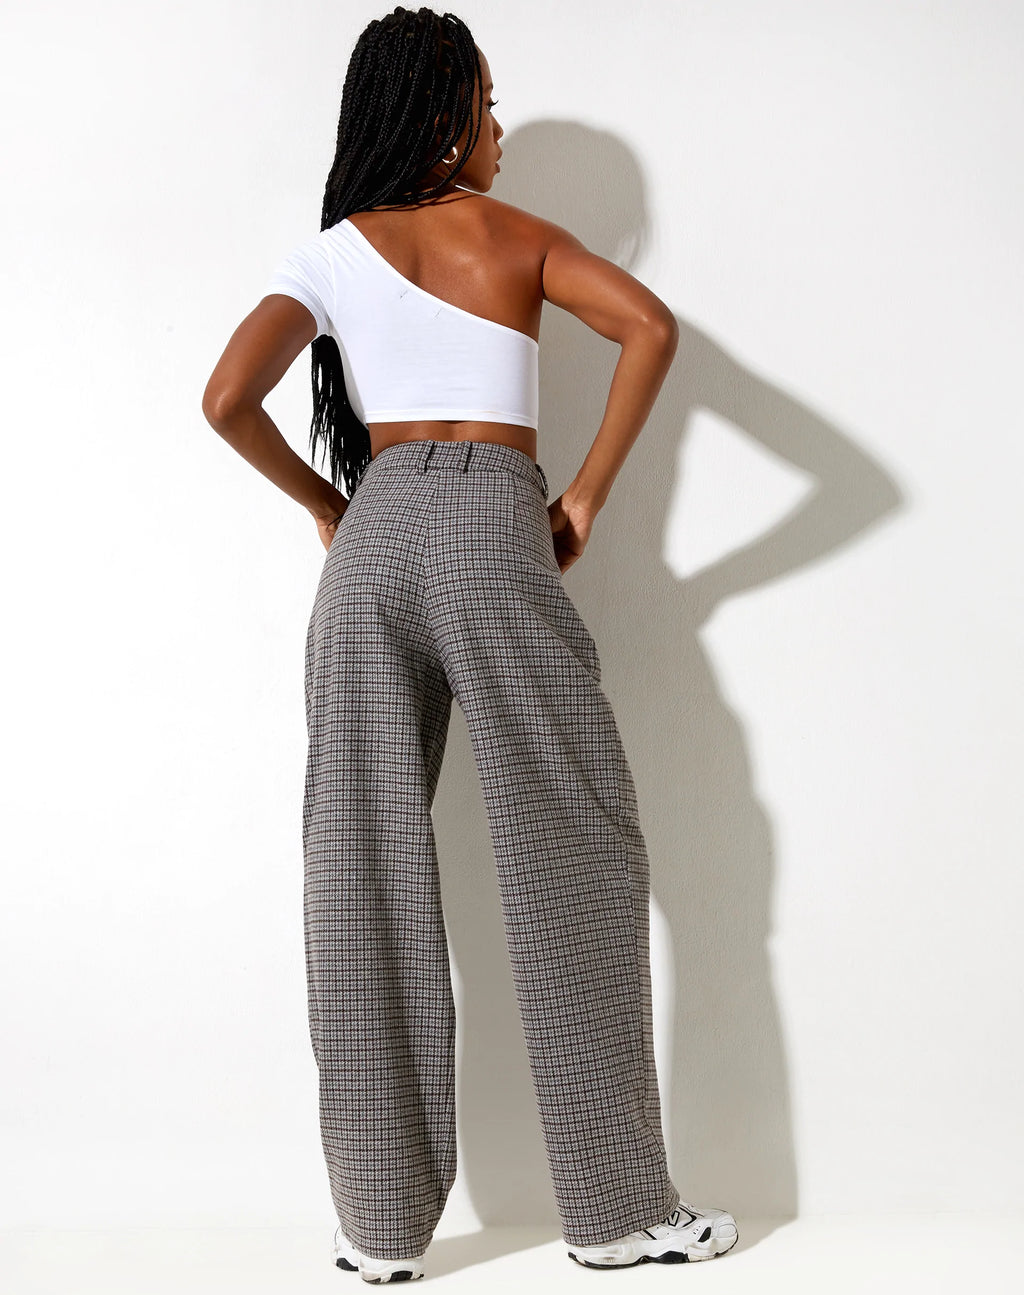 Sakila Trouser in Wool Grey and Black